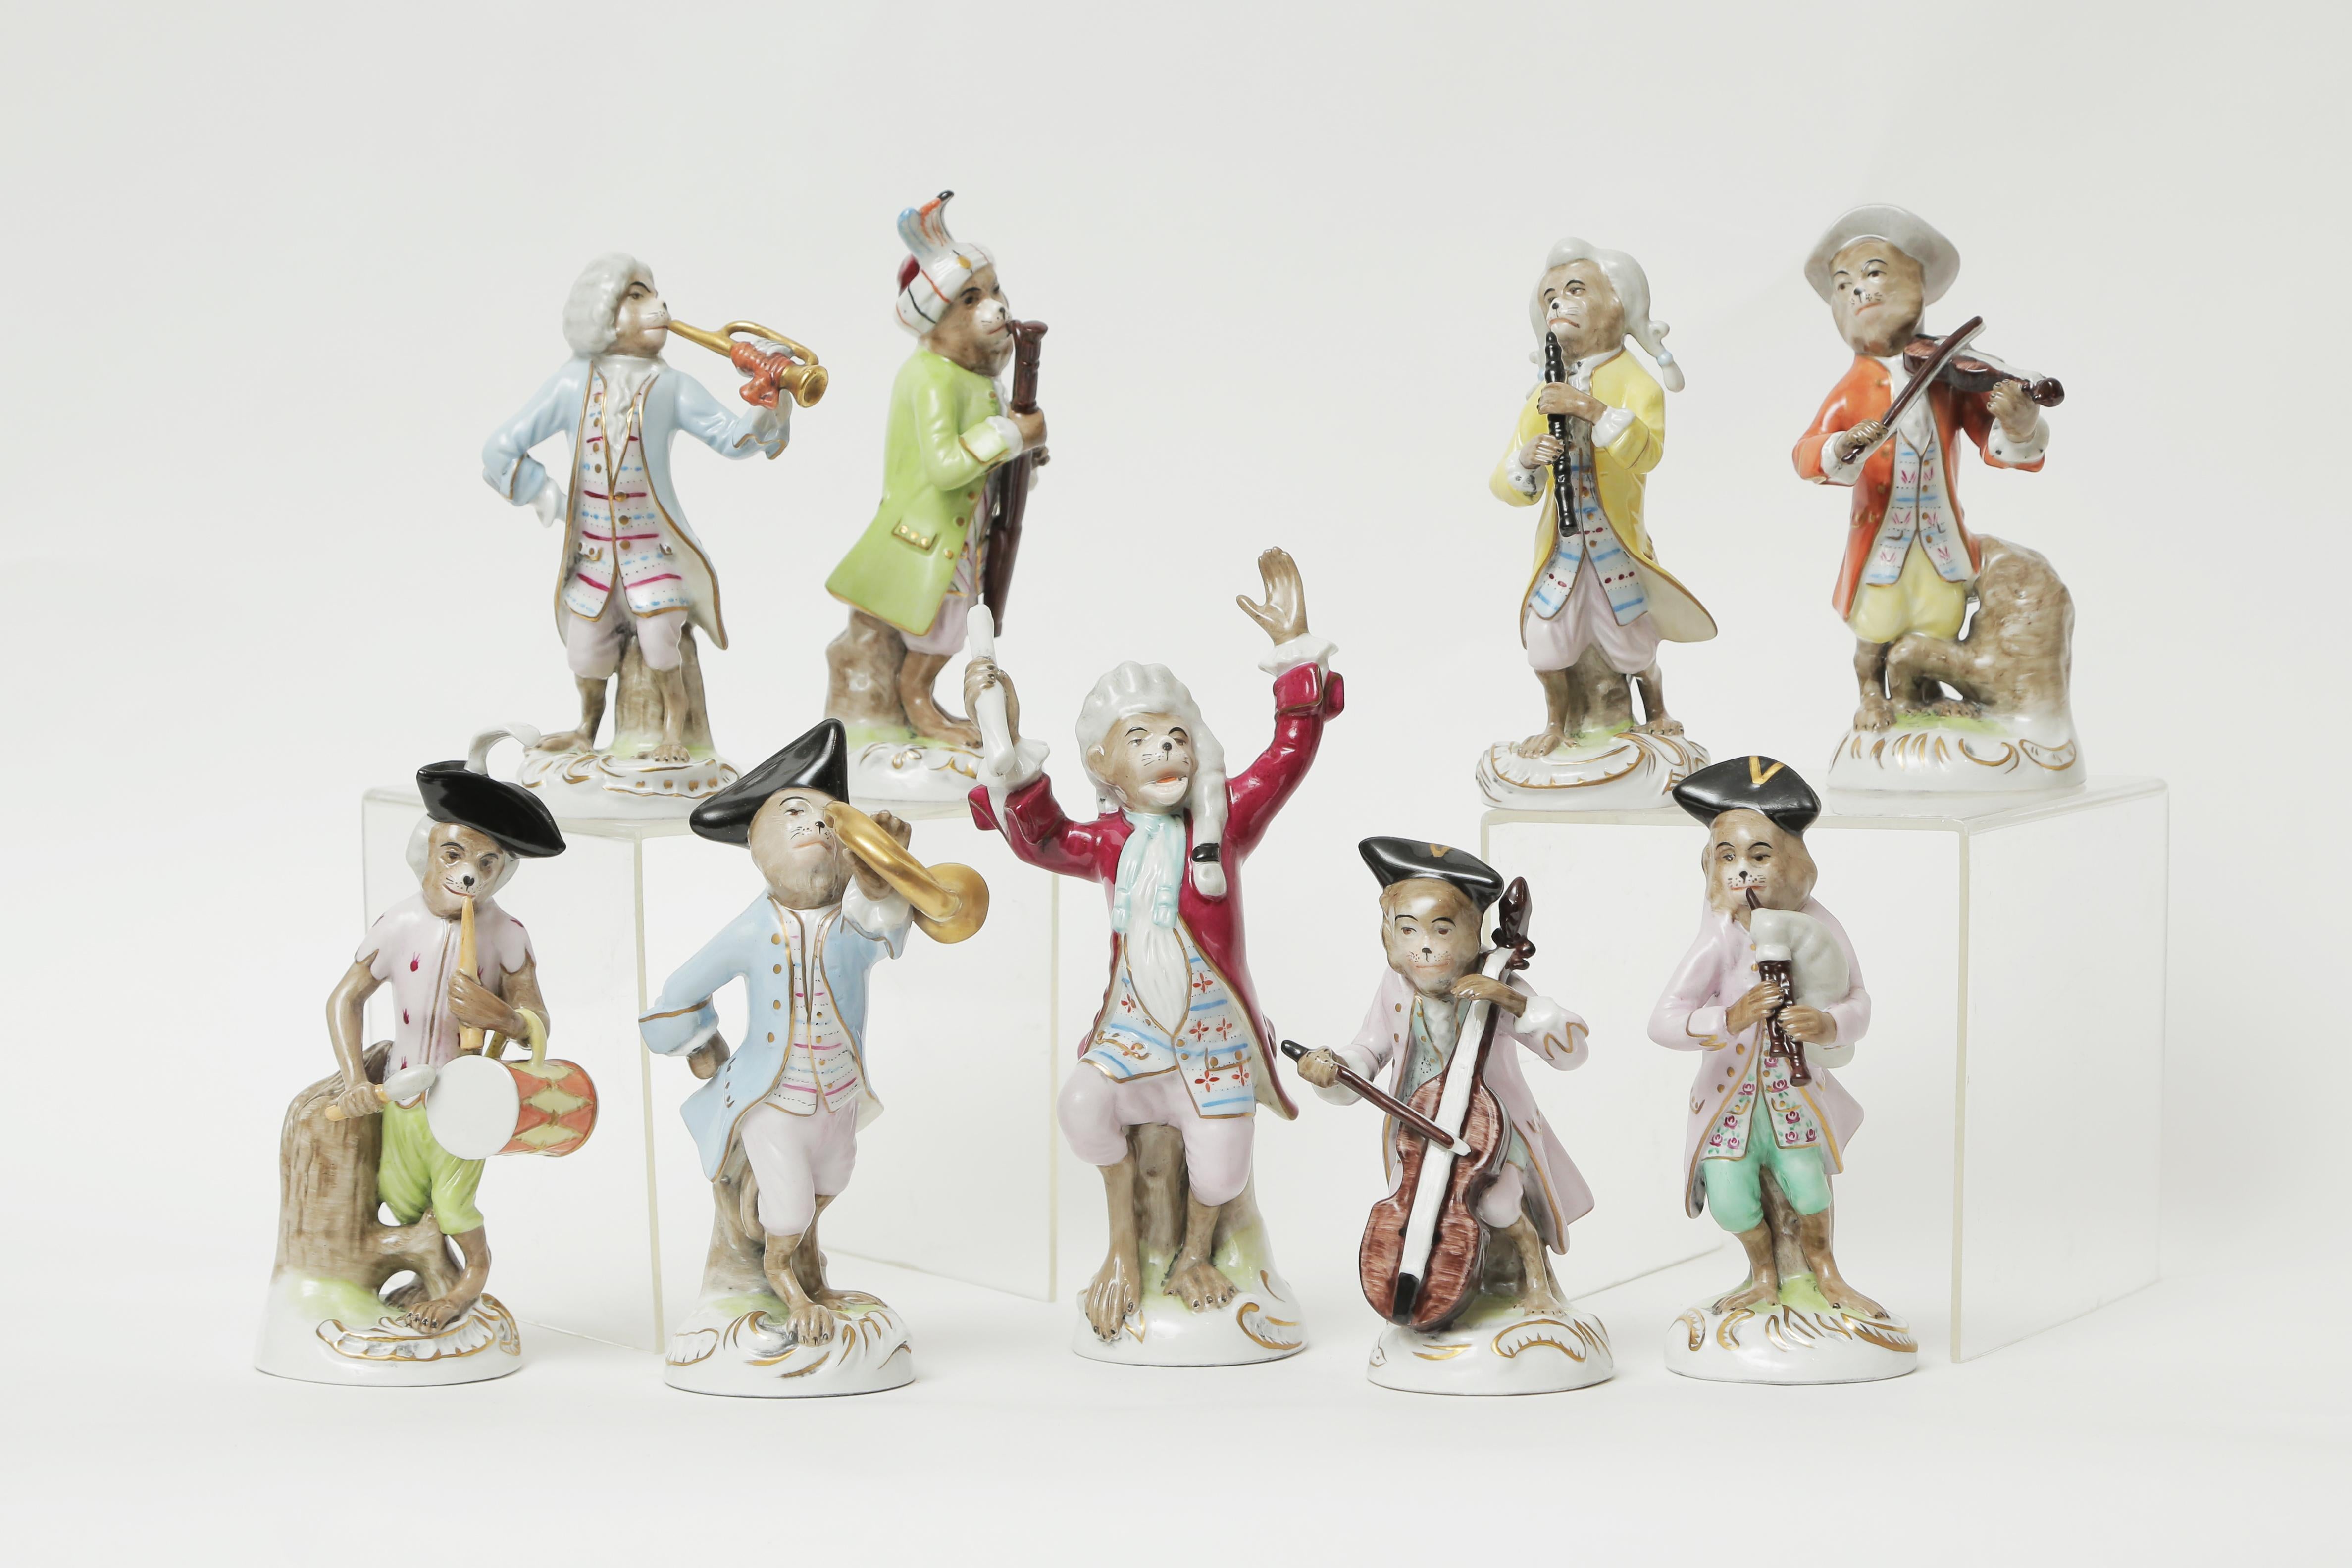 A charming and whimsical grouping of fine antique porcelain figurines by Dresden. We have the main conductor orchestrating his fellow bandmates in merriment. The colors have remained vibrant and crisp with very fine detailing to the molding of the